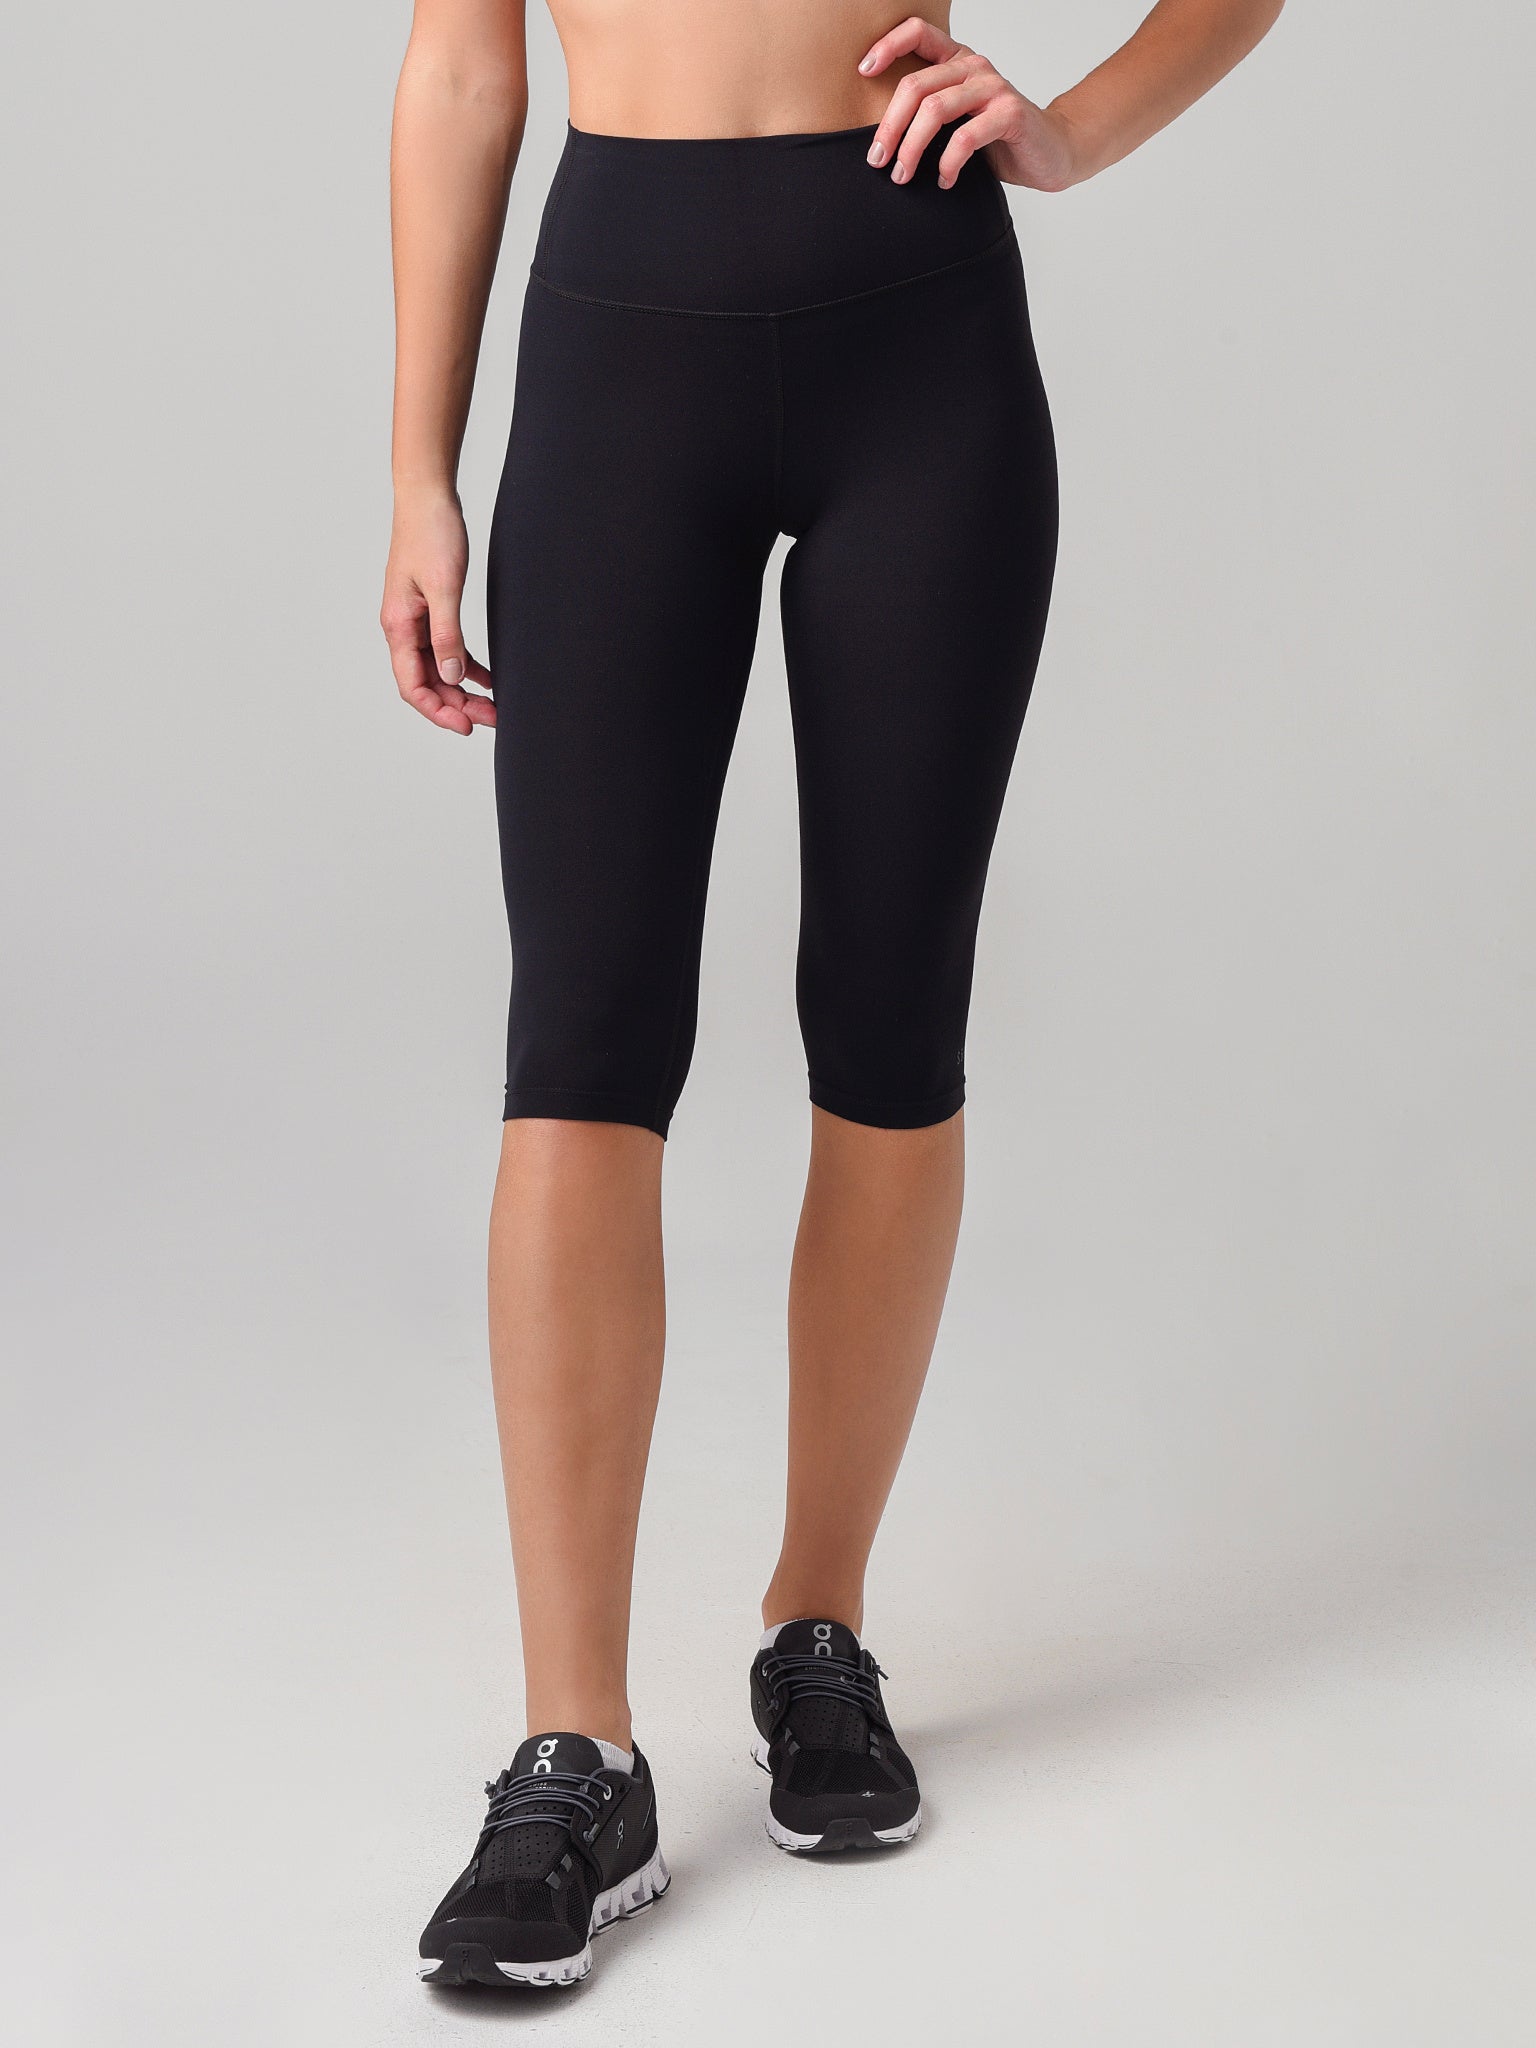 SPLITS59 Airweight cropped stretch leggings